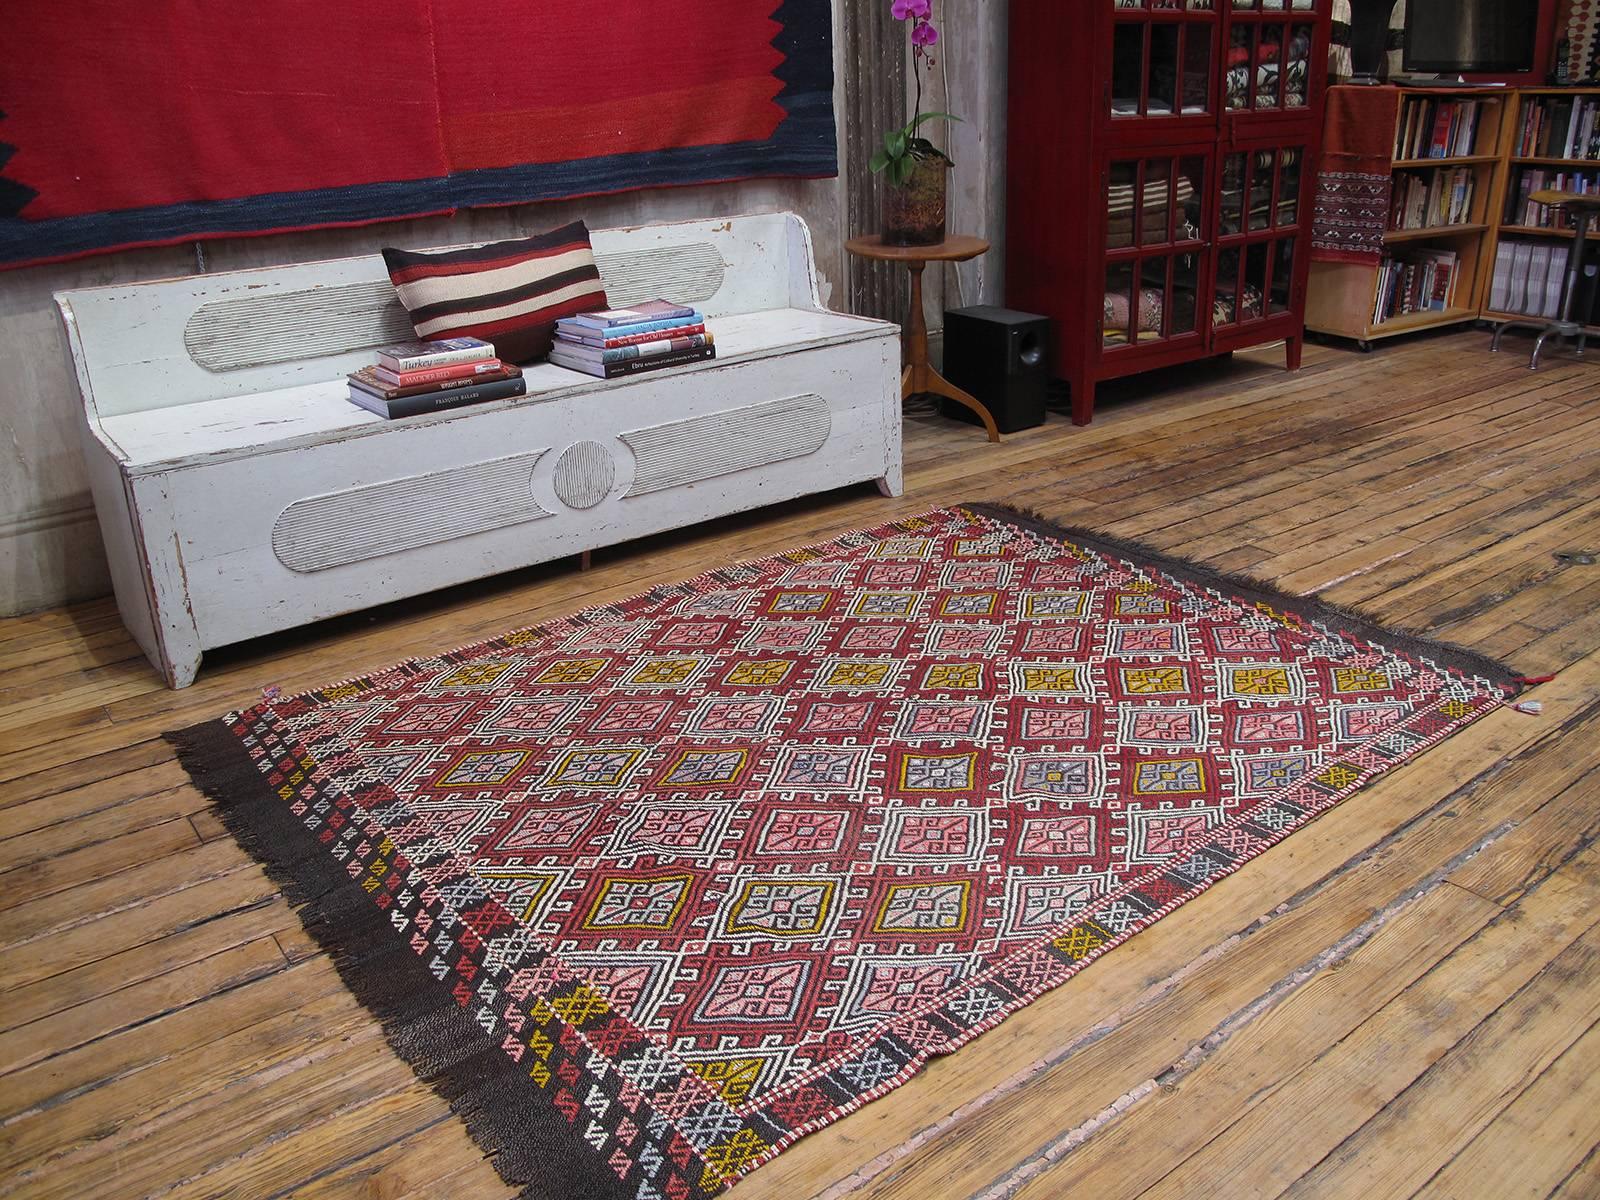 A beautiful old tribal flat-weave from Western Turkey, woven in the intricate 